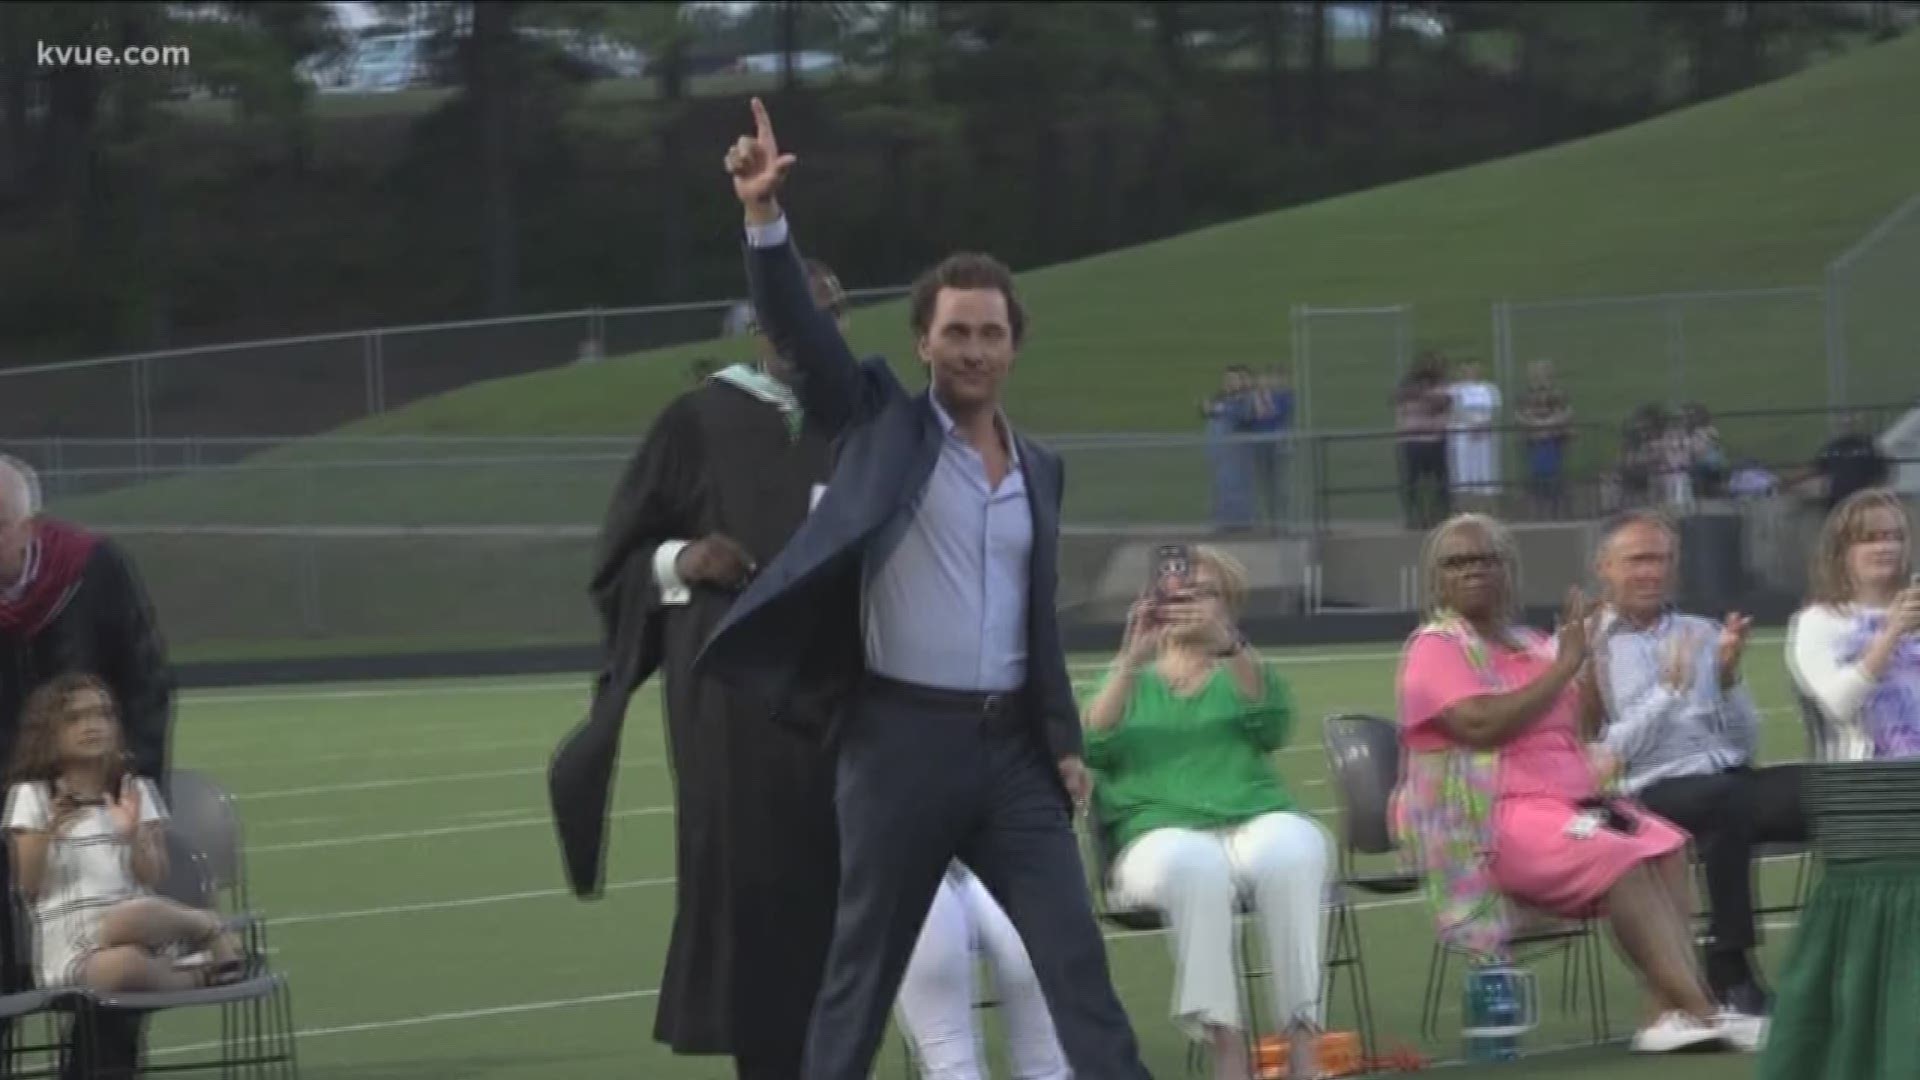 Matthew McConaughey finally received his high school diploma more than 30 years after graduating.